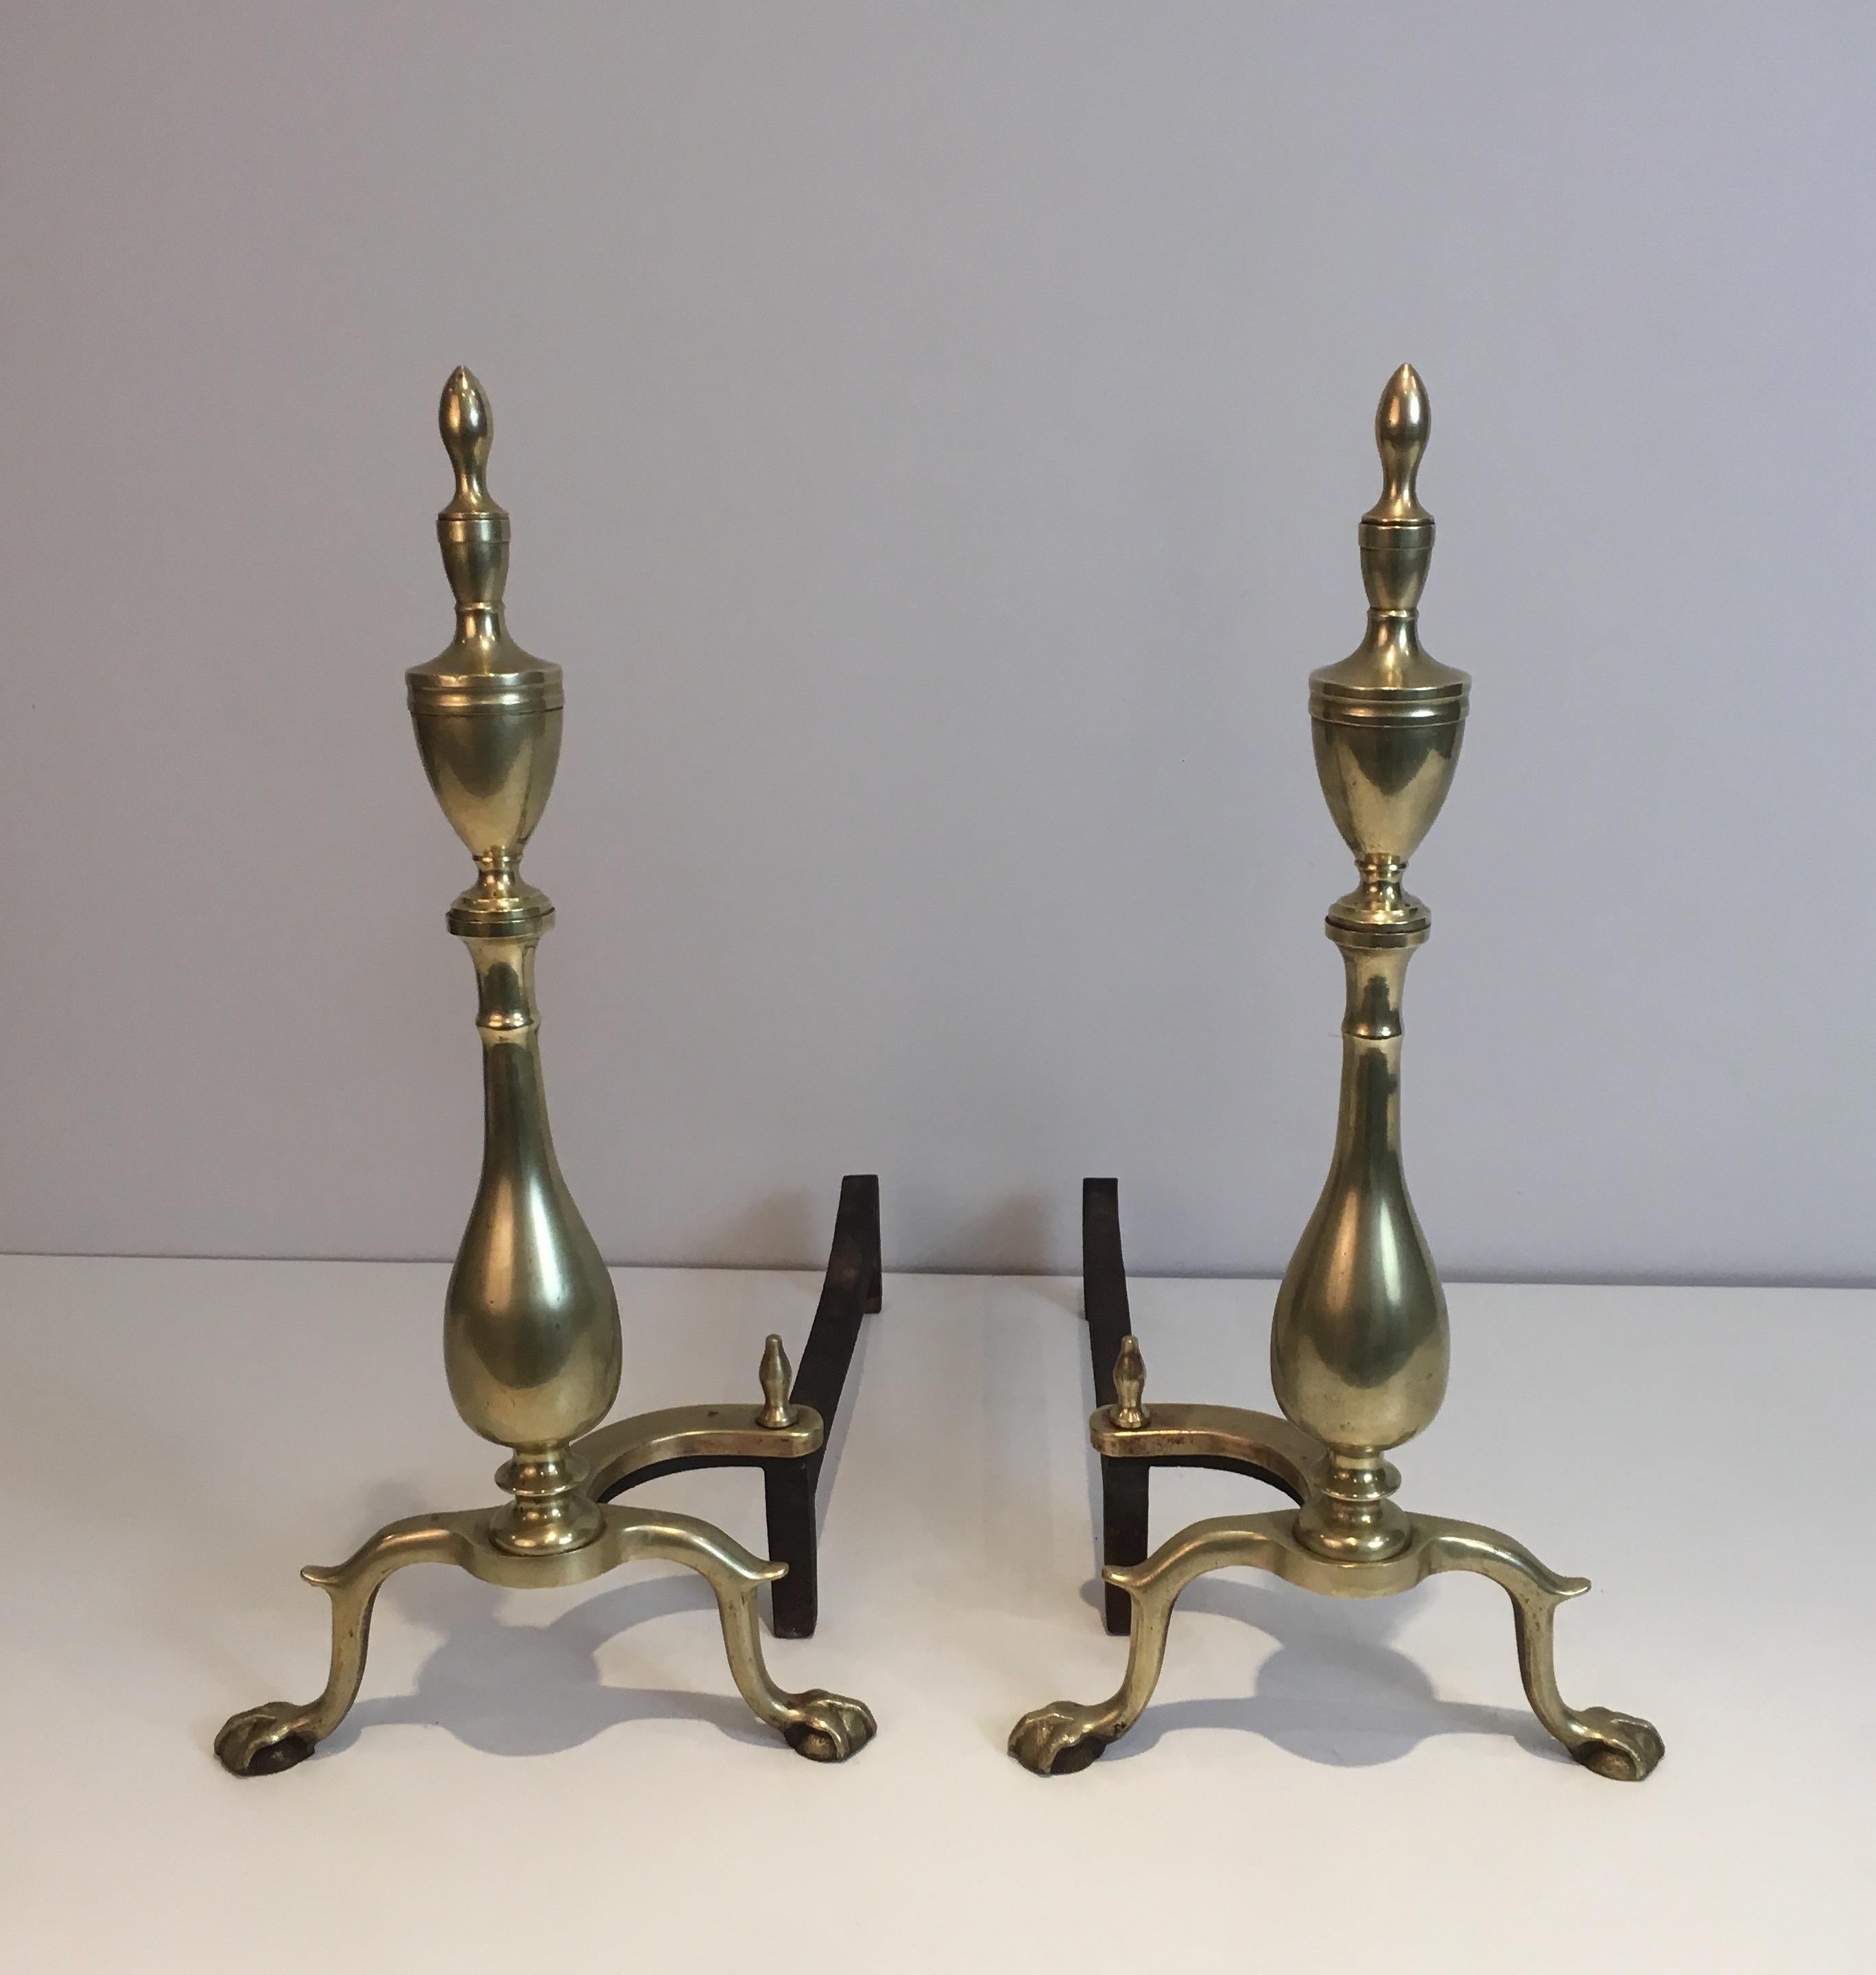 Pair of Neo-Gothic Bronze and Wrought Iron Andirons, French, 19th Century For Sale 12